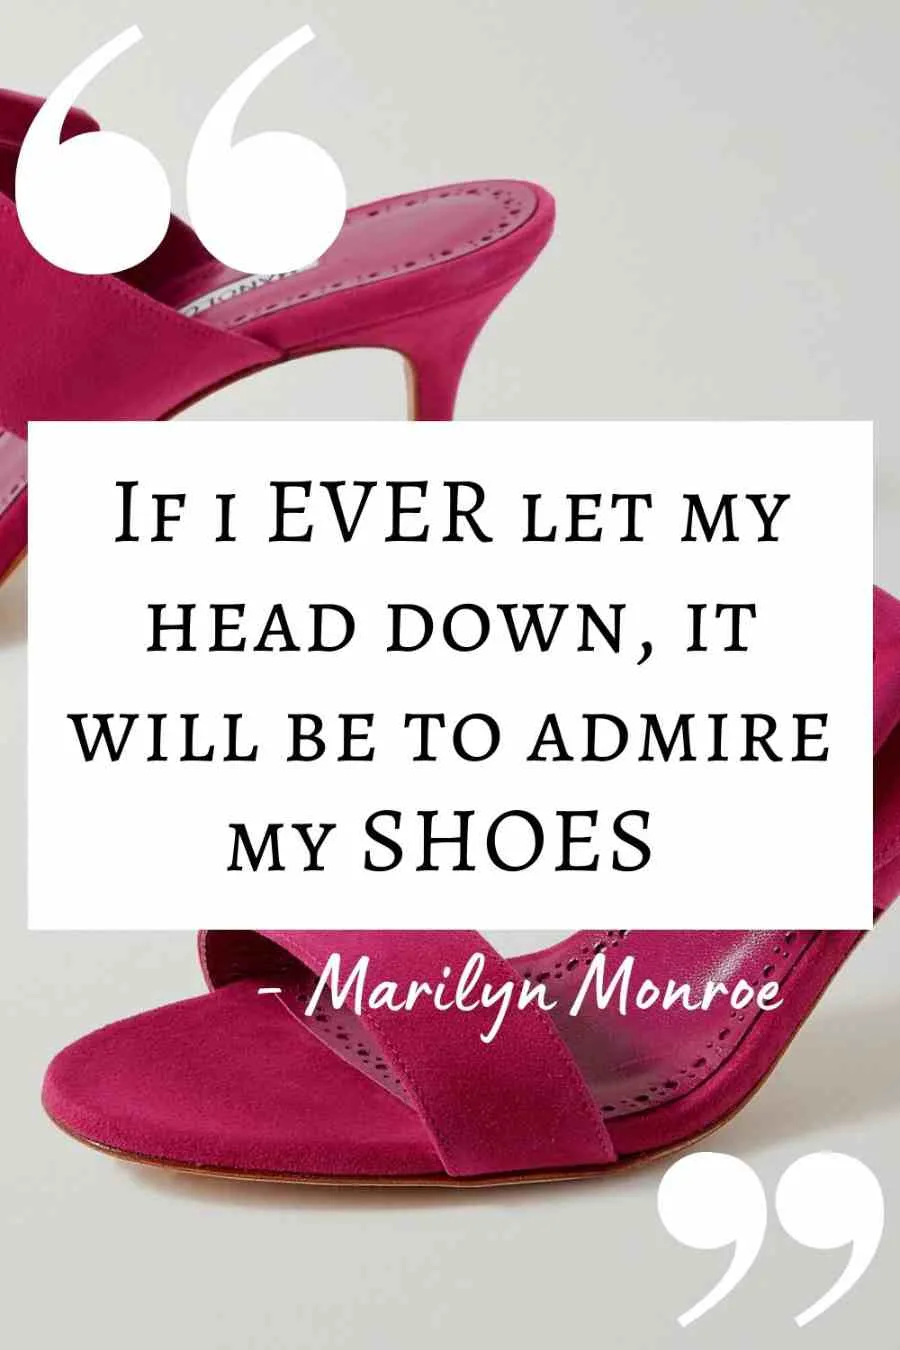 Shoe Quote by Marilyn Monroe about shoes: "If I ever let my head down, it will be to admire my shoes" text overlay on pink shoes.